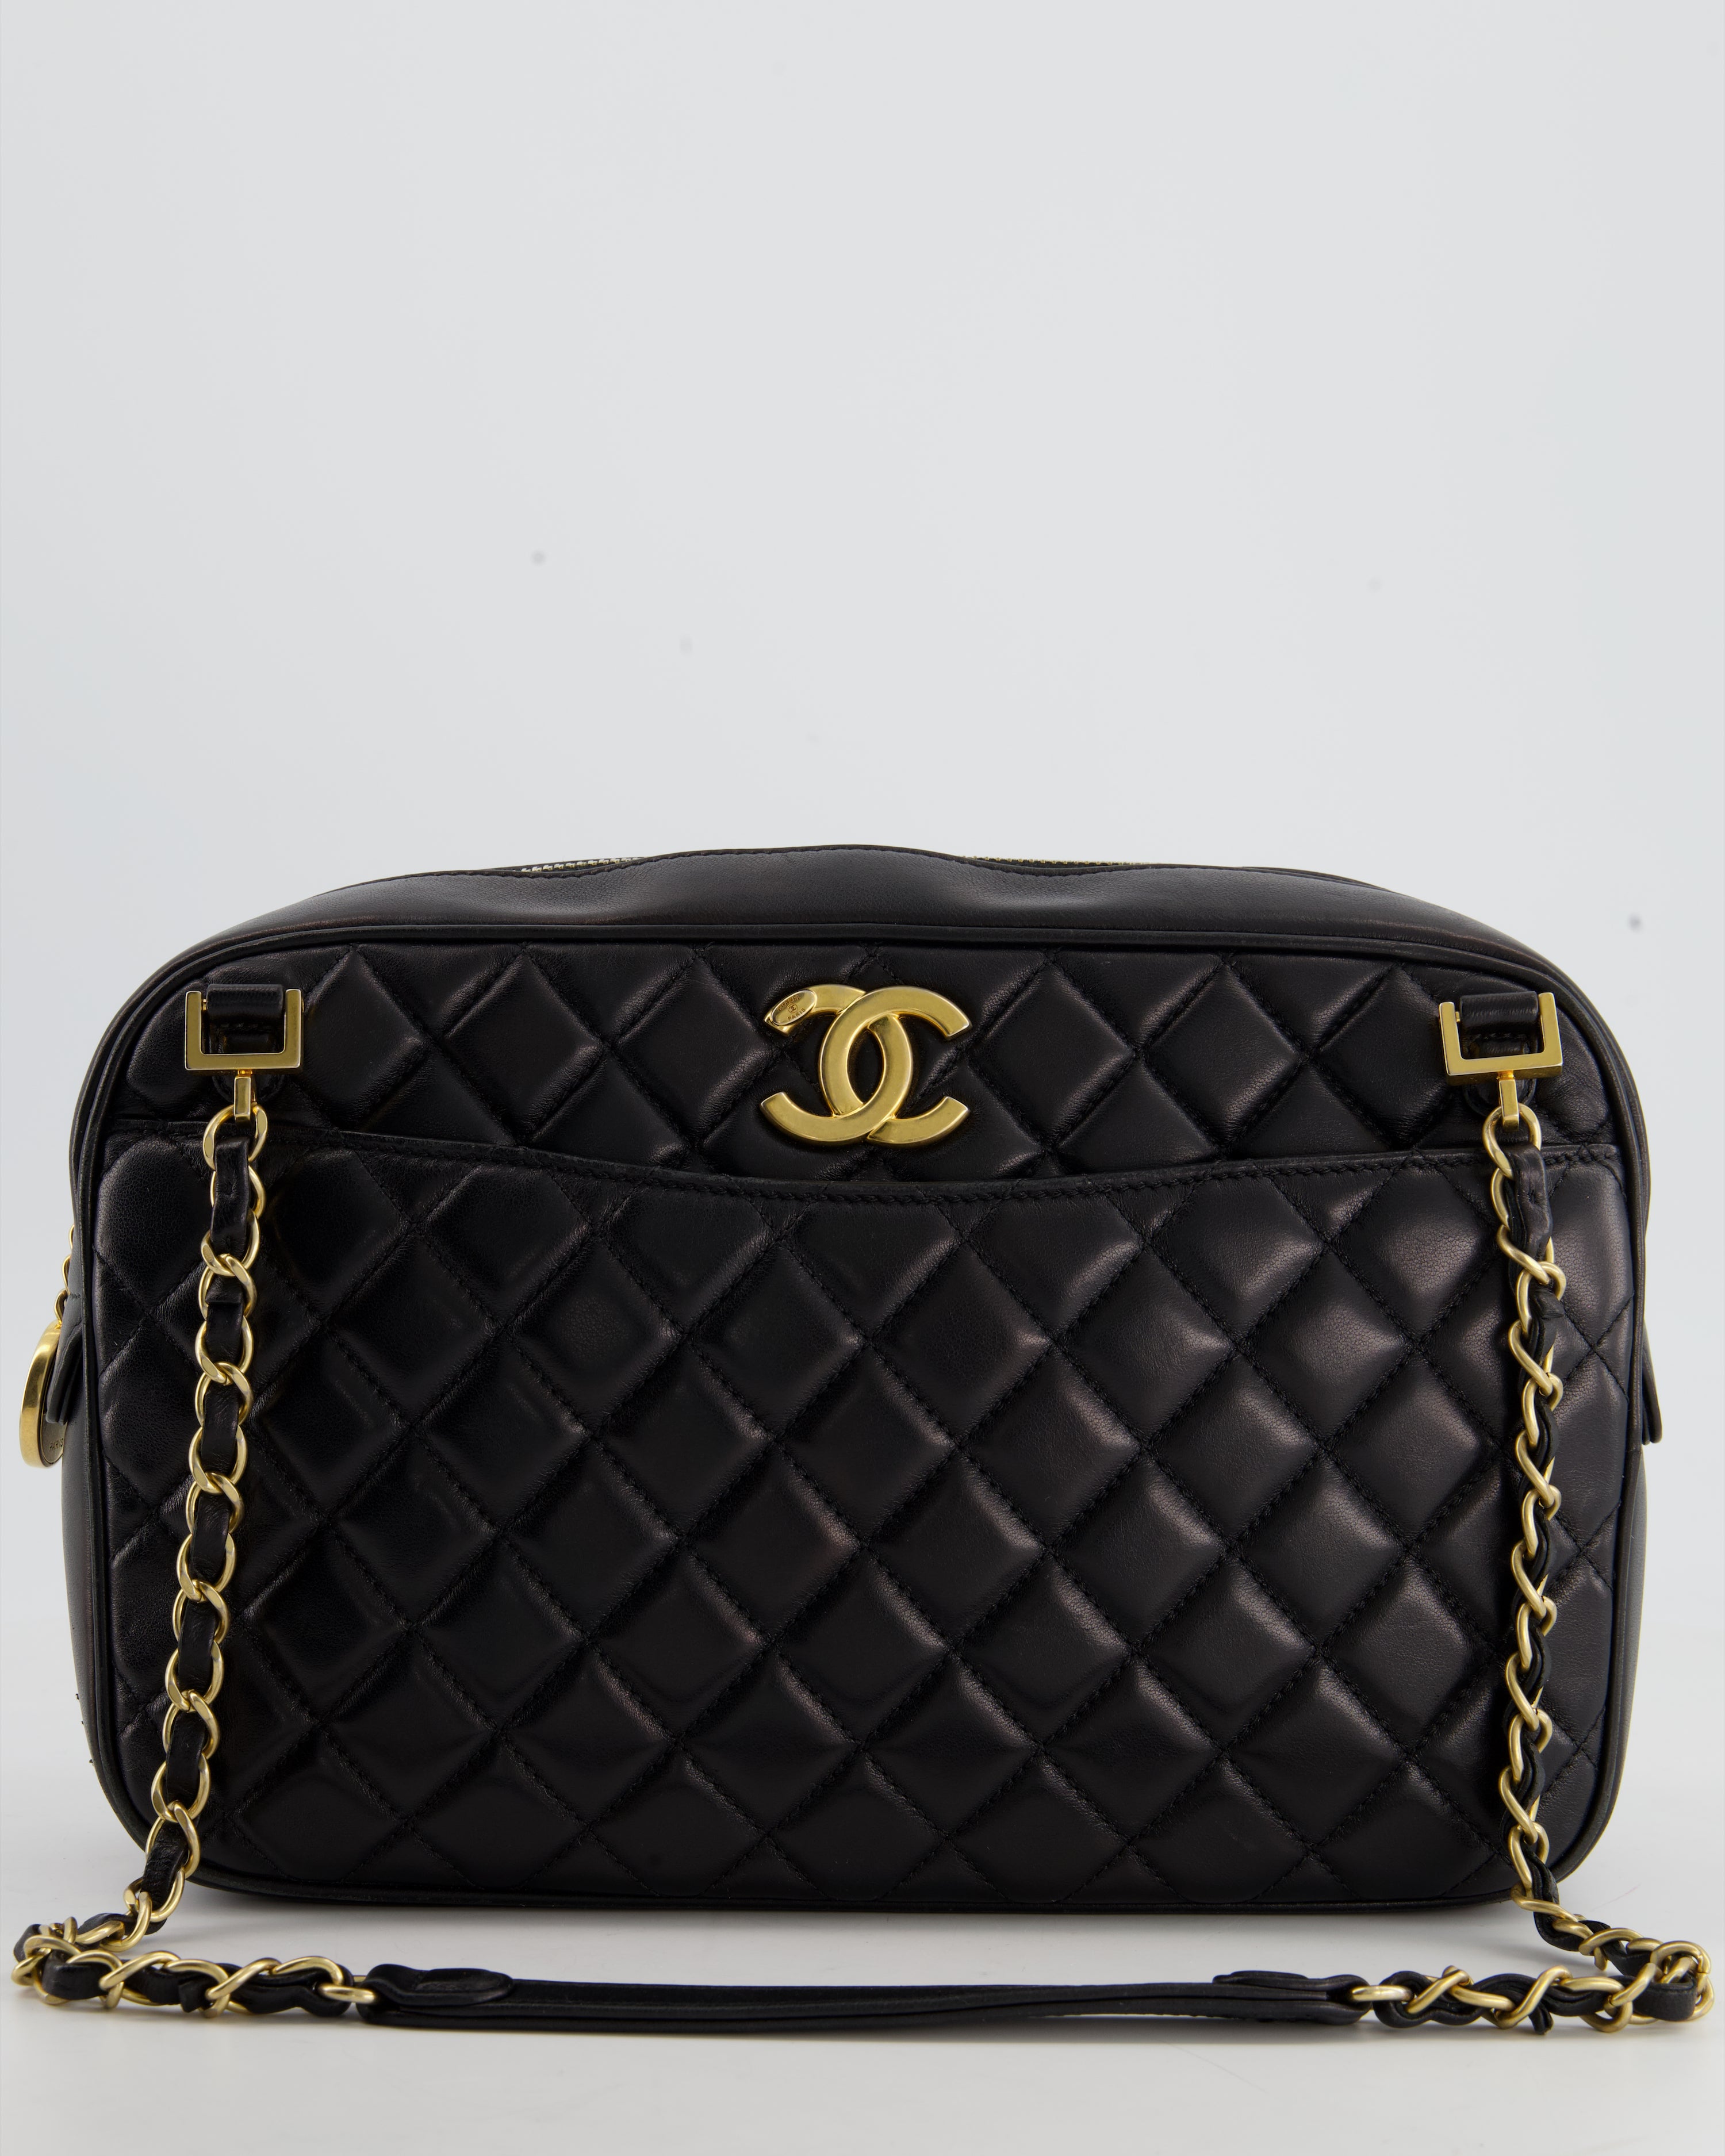 A BLACK LAMBSKIN LEATHER CAMERA BAG WITH GOLD HARDWARE, CHANEL, 2002-2003